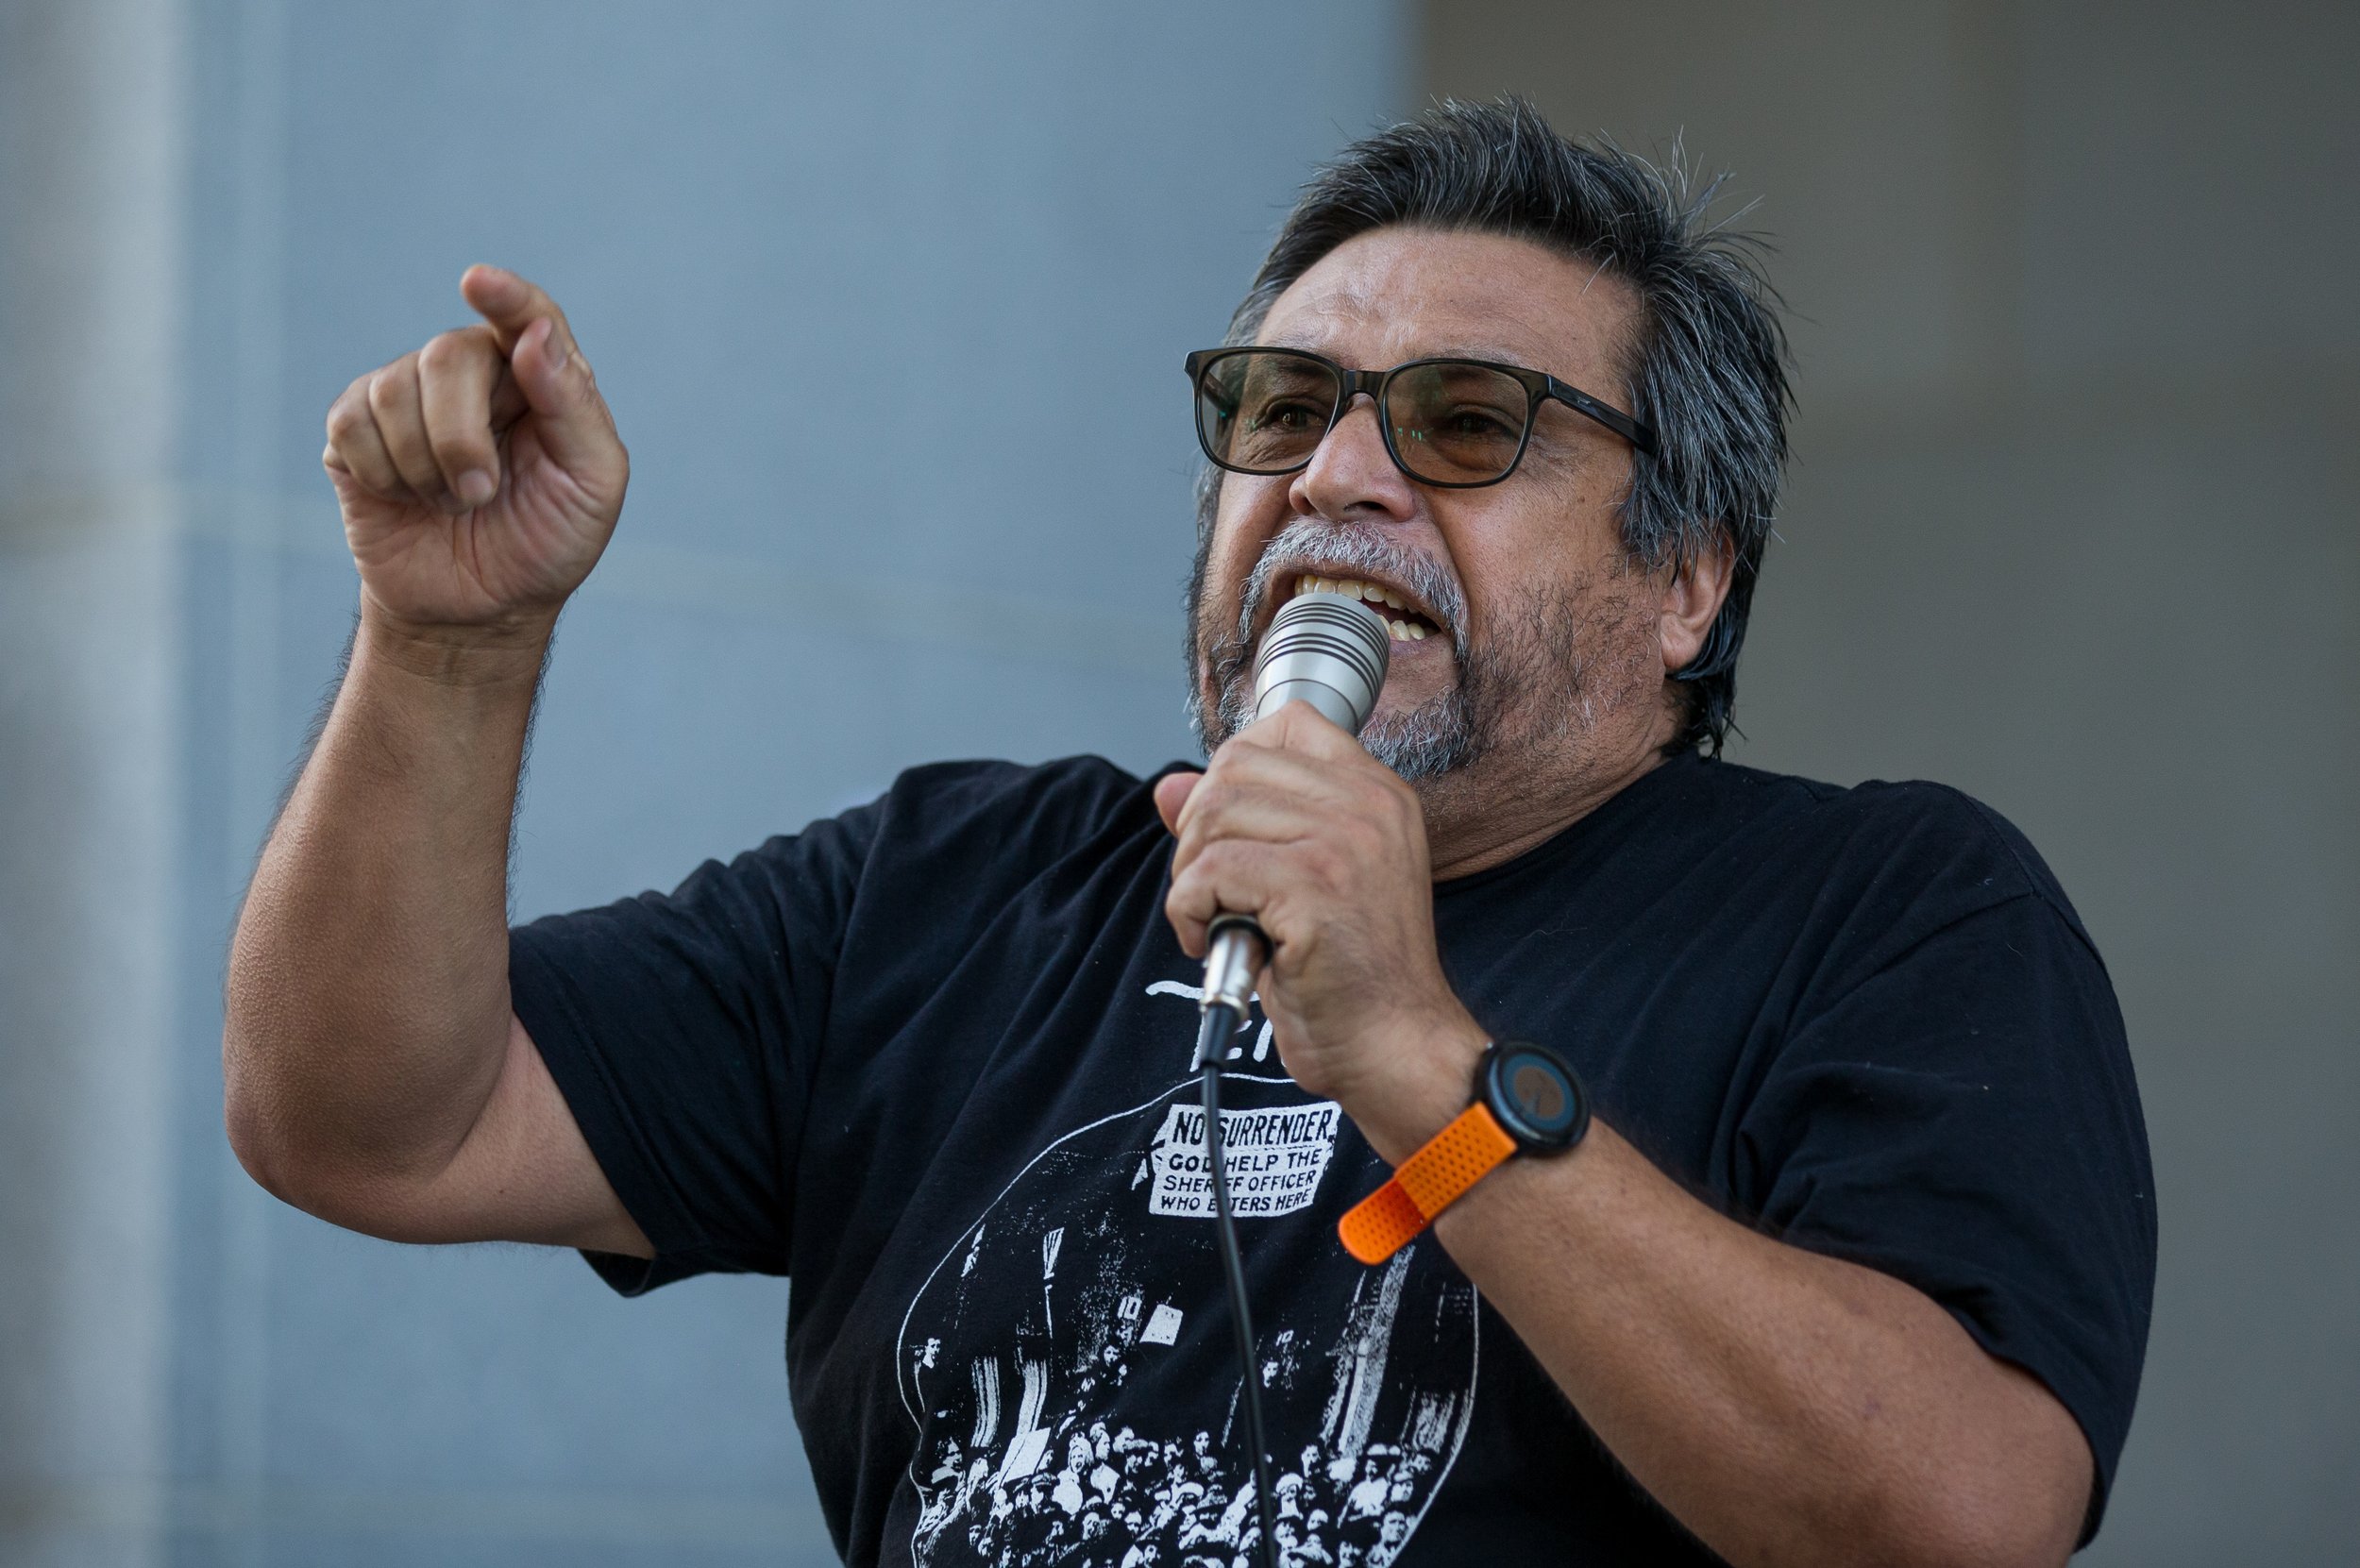  Leonardo Vilchis volunteered to speak to the protesters outside the Los Angeles City Hall calling for Kevin De Leon to resign from the L.A. council after racist remarks were made in an audio that was leaked which also included Gil Cedillo and Nury M